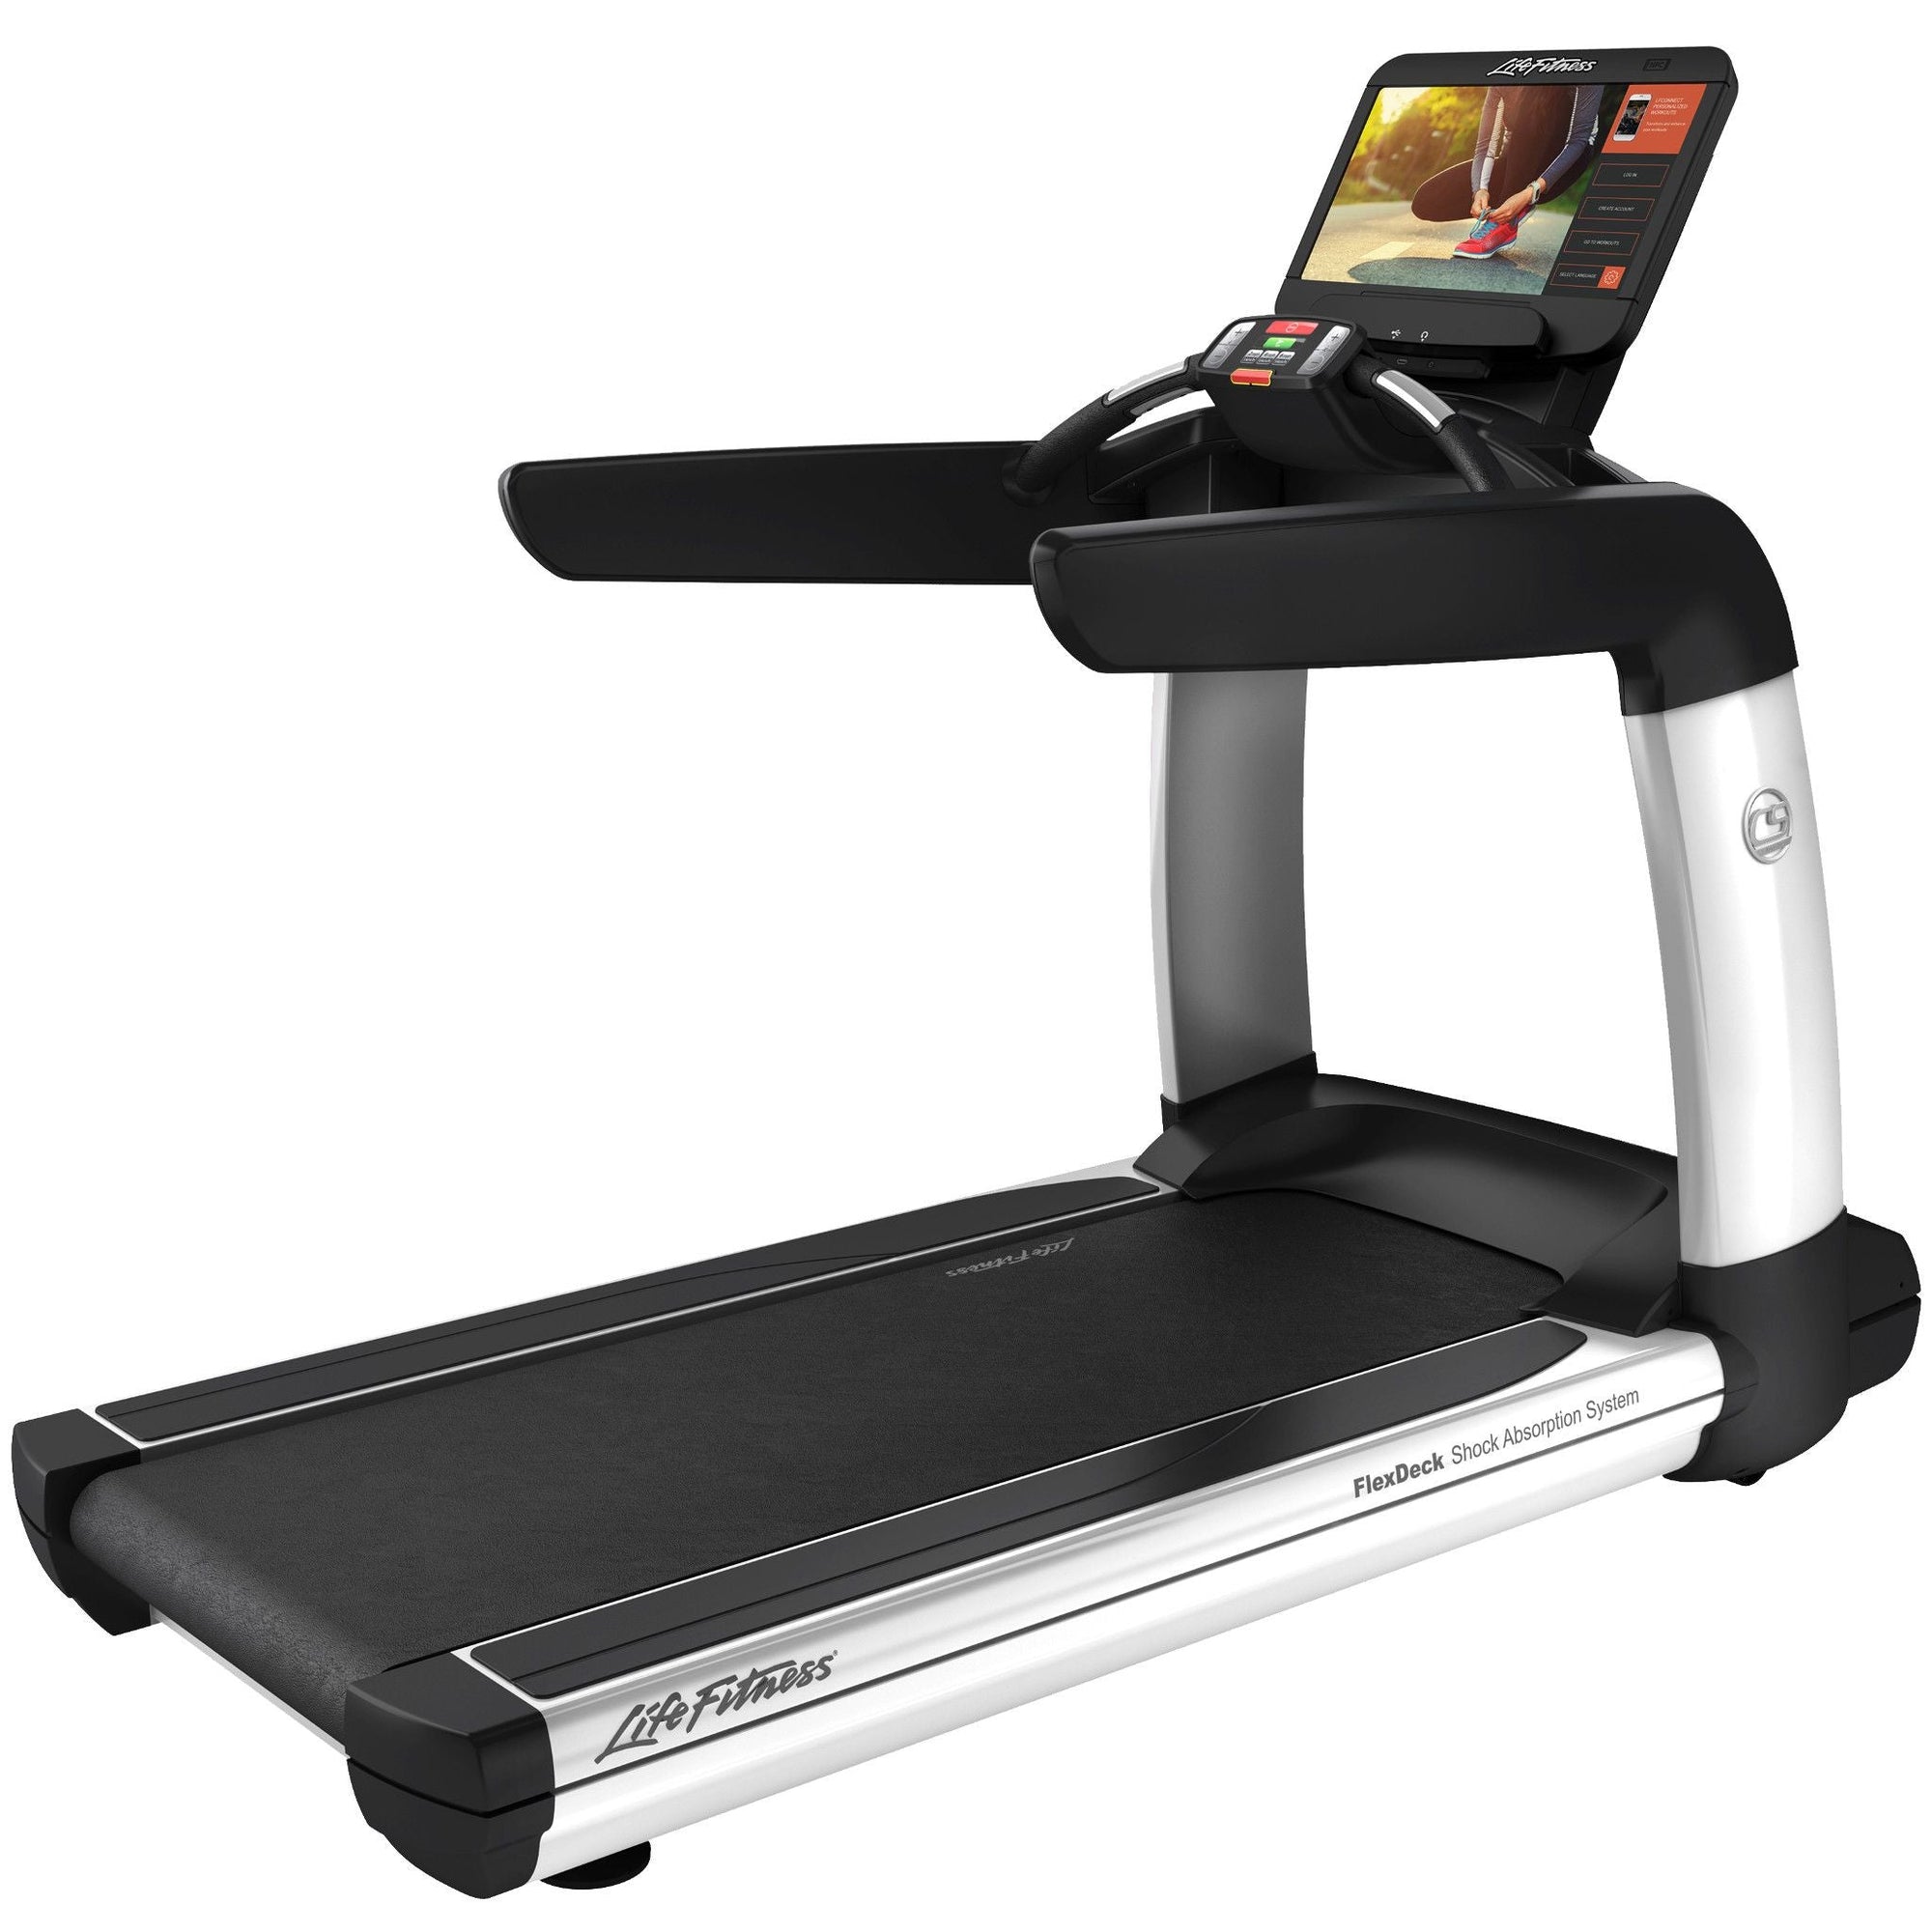 Life Fitness Platinum Club Series Treadmill with DISCOVER SE3HD Console